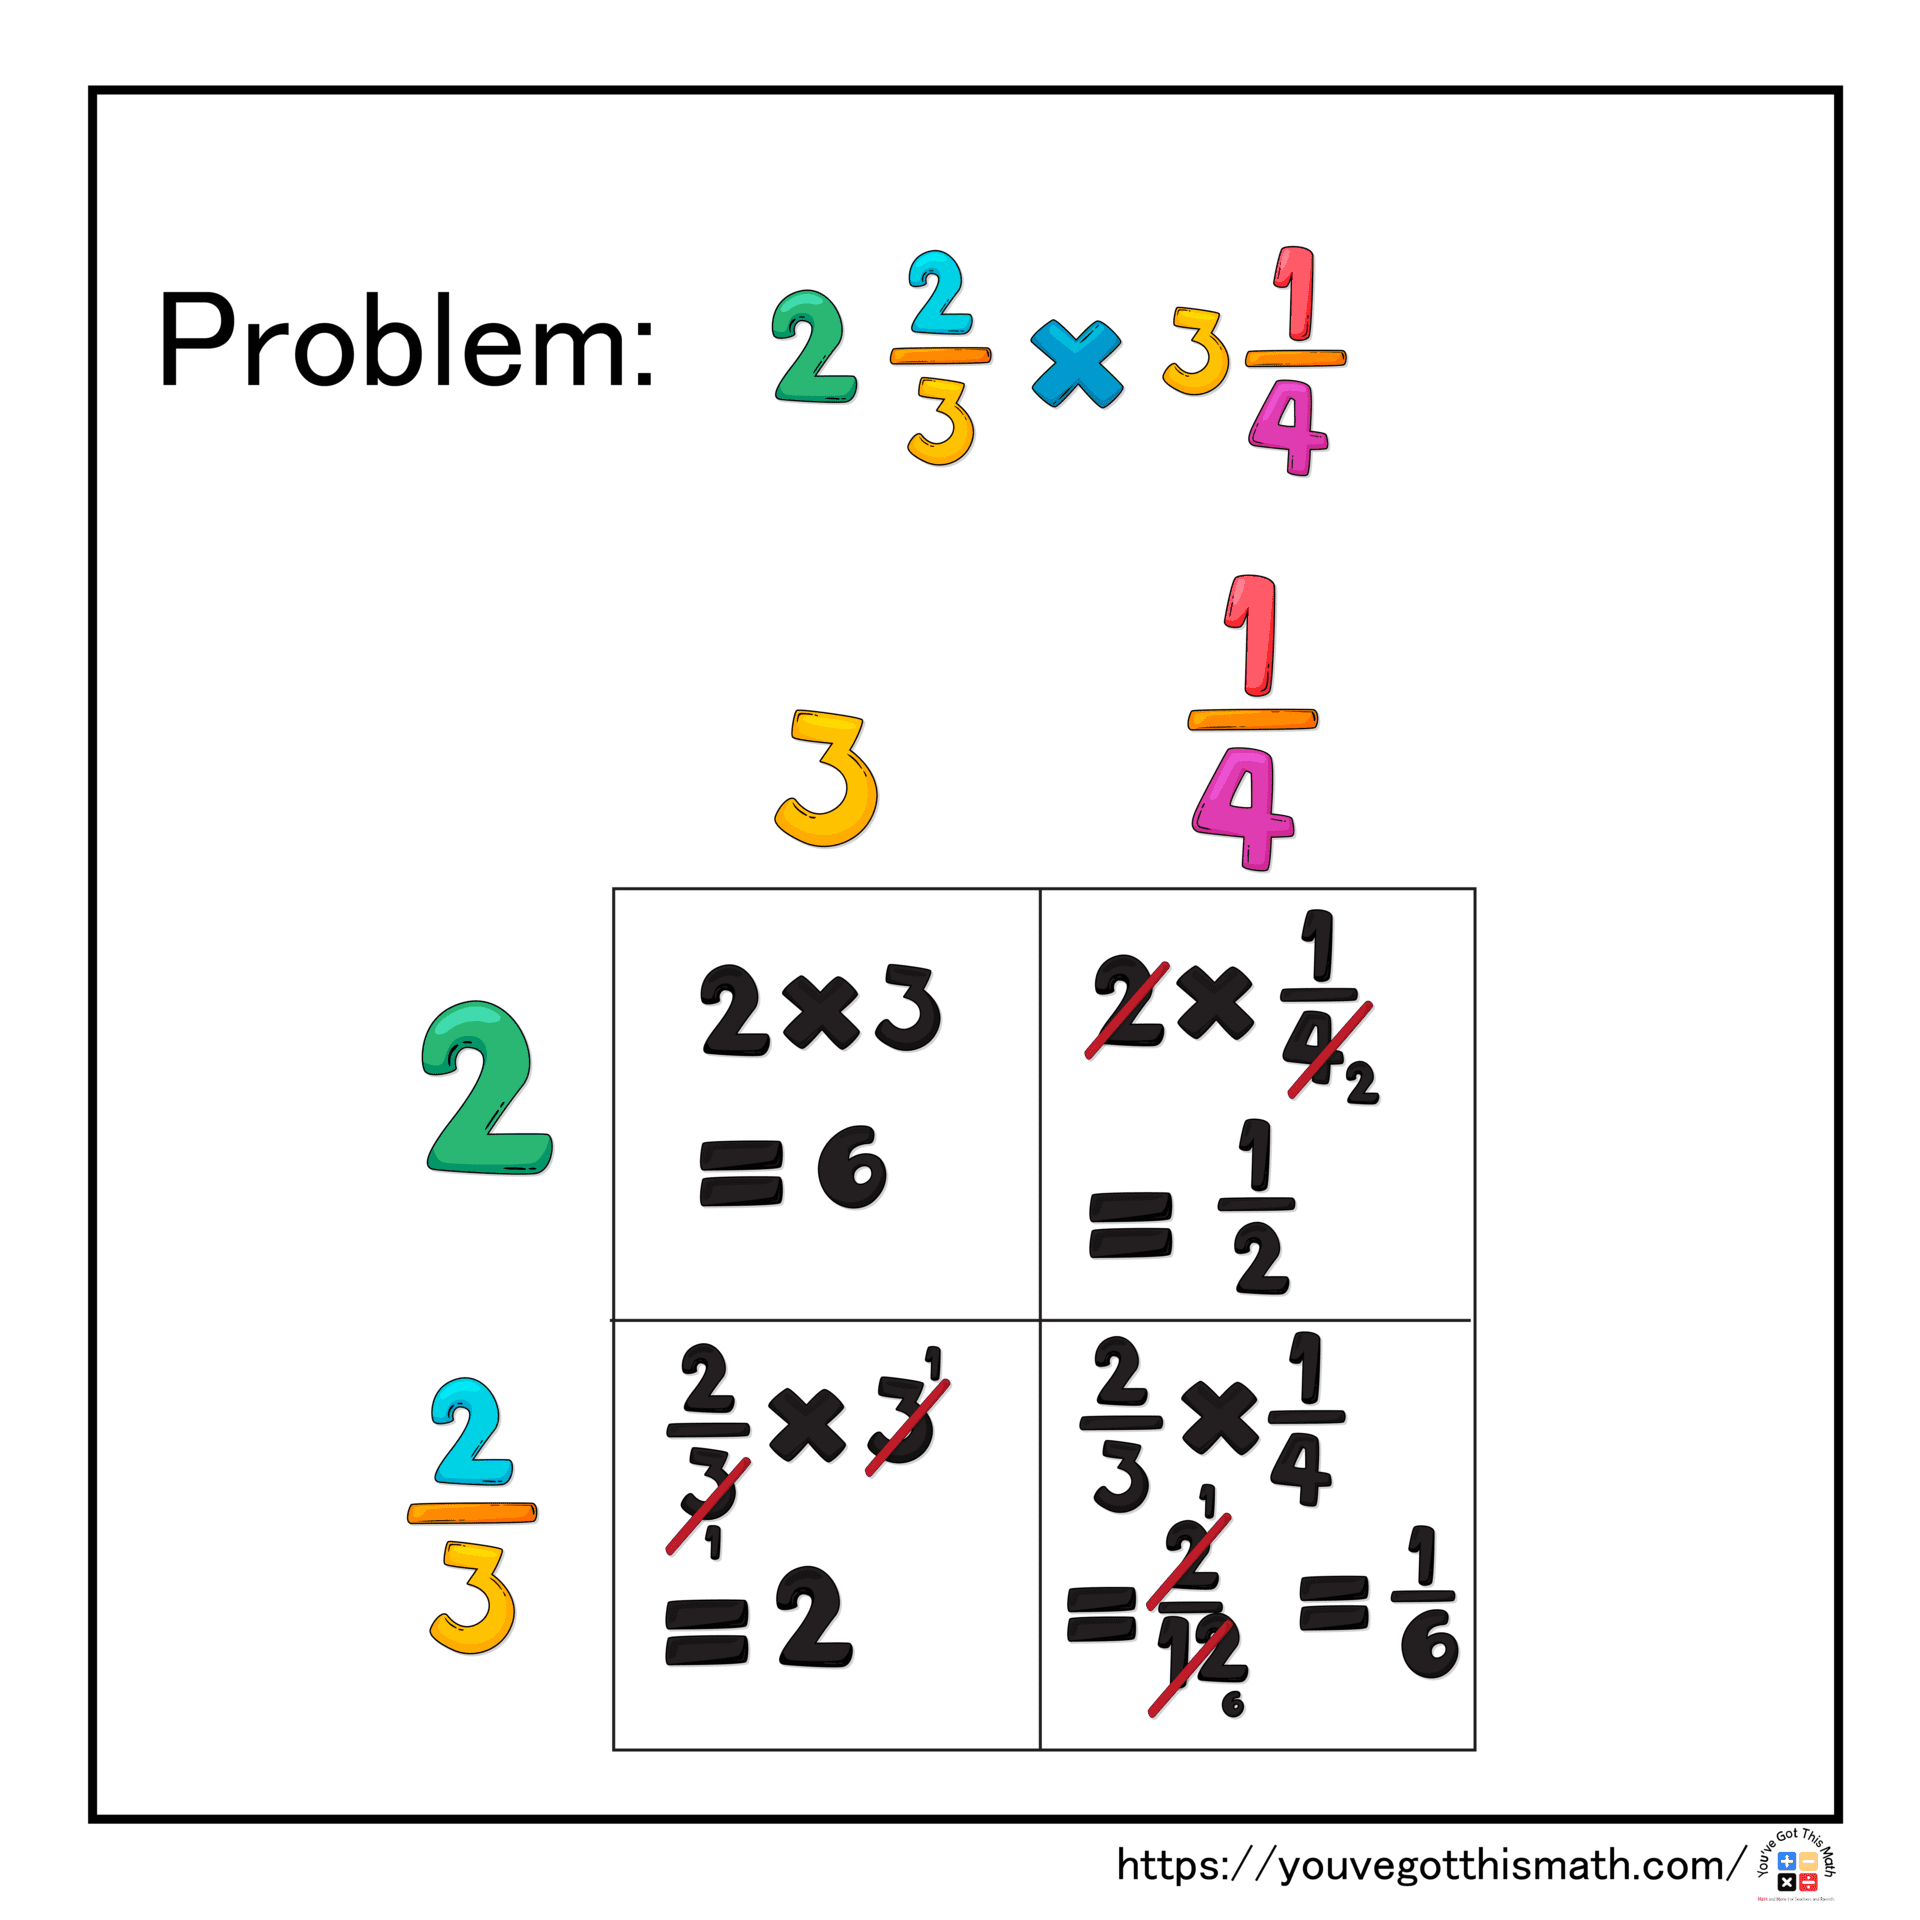 Writing Result of Each Multiplication